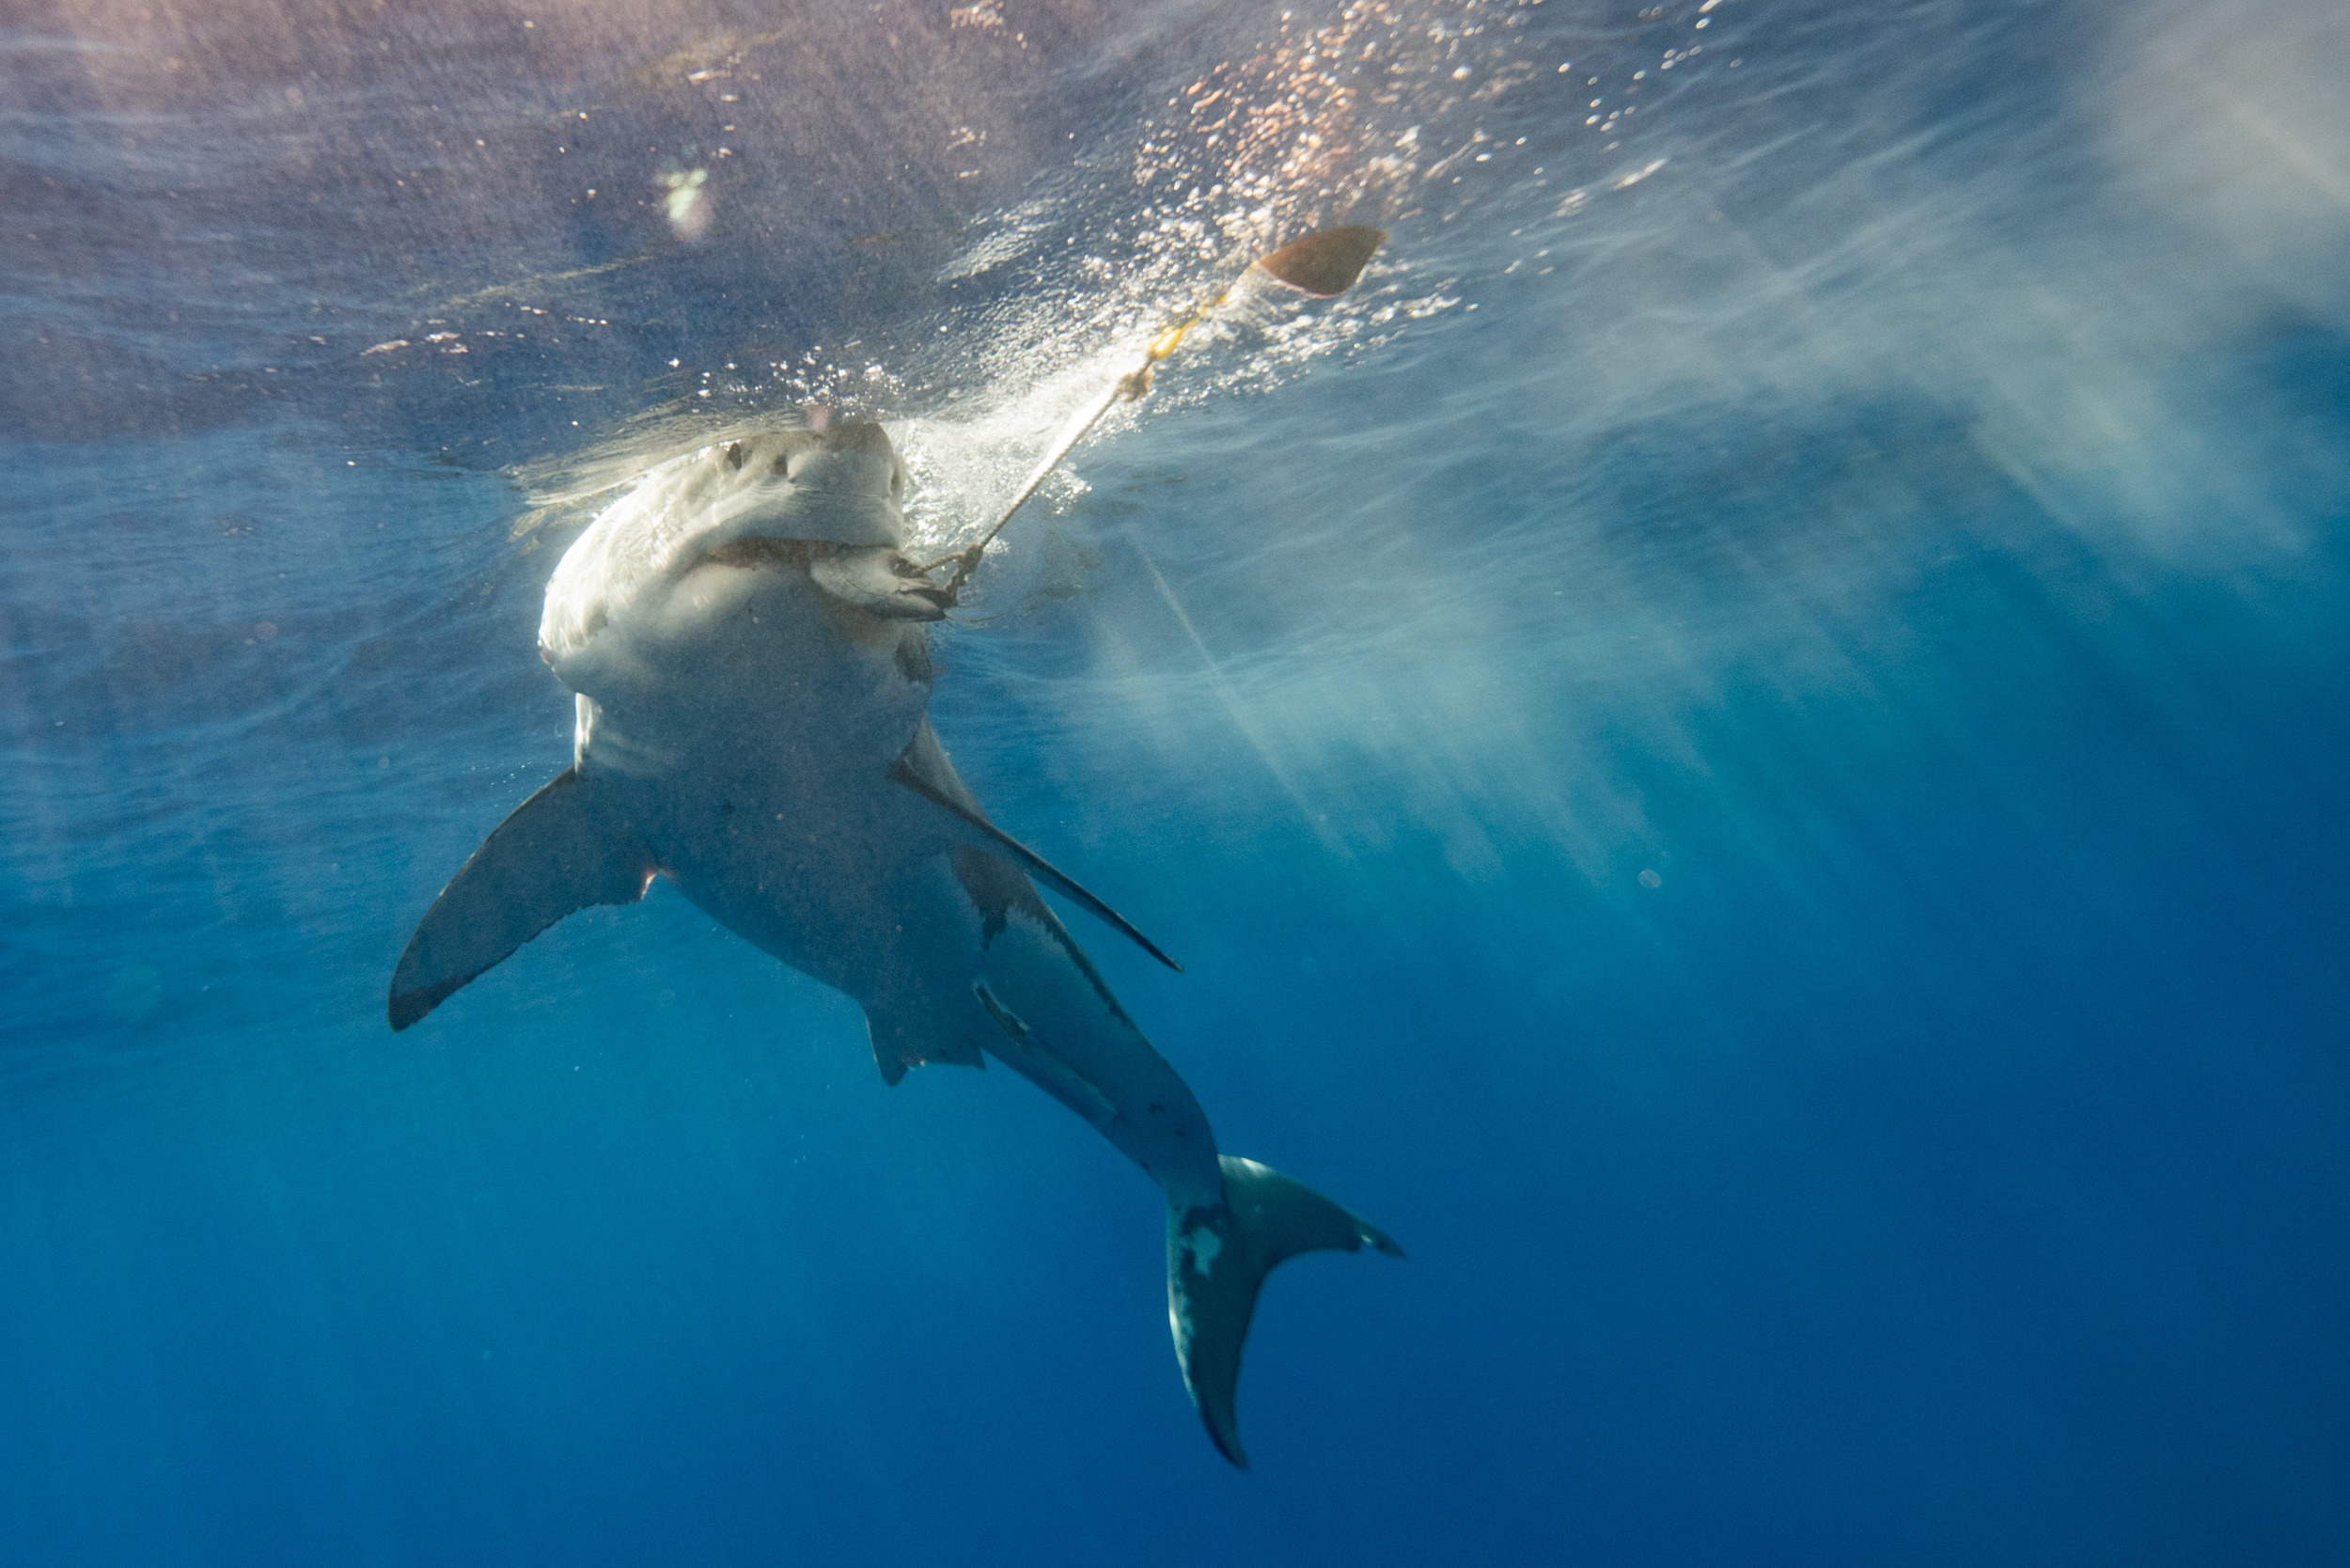 These Images Might Offer The World's Inaugural Glimpse Of a Living Newborn Great White Shark